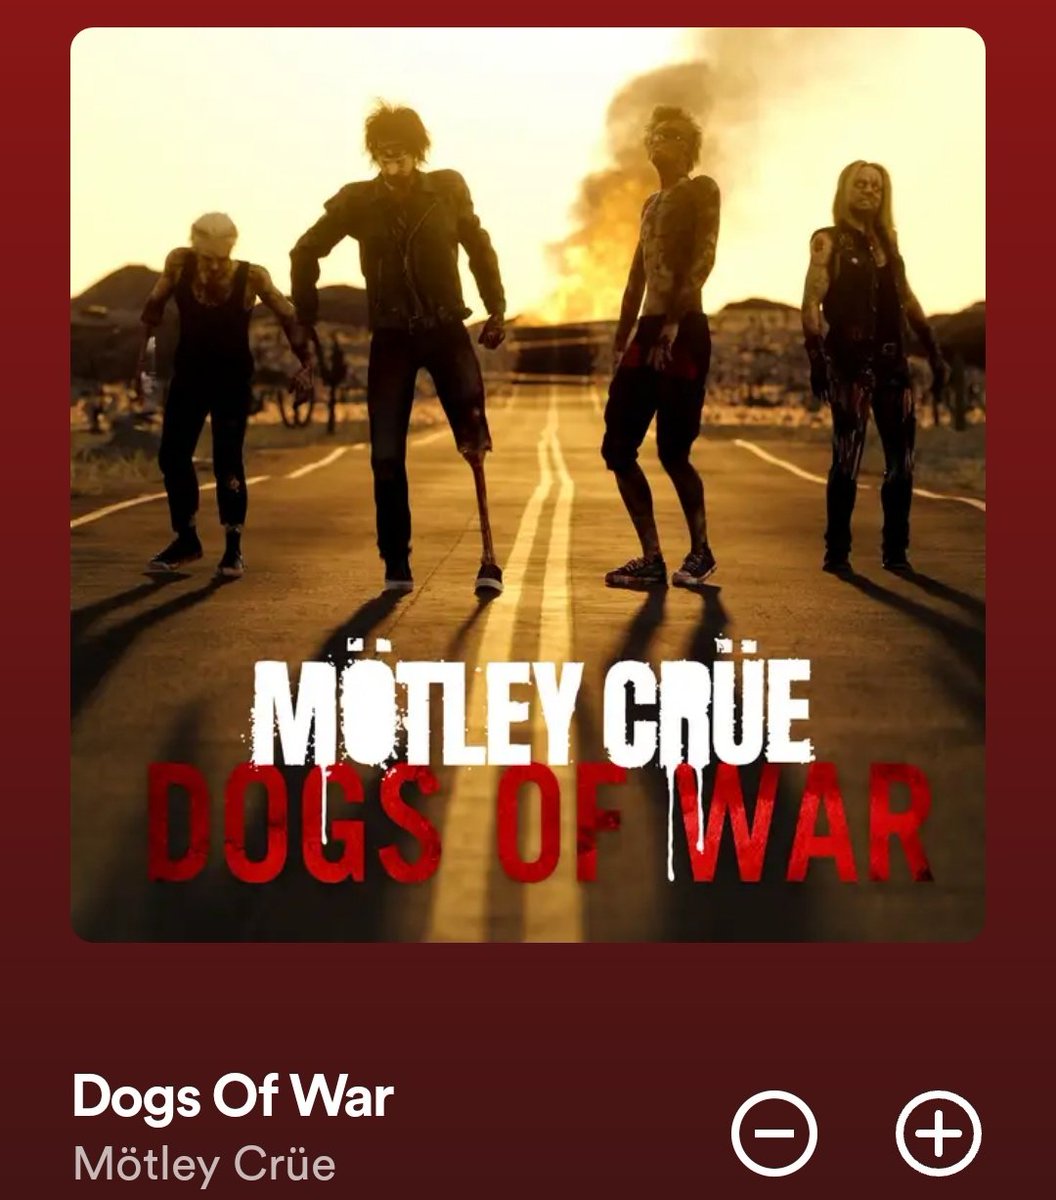 Let slip the Dogs Of War and @MotleyCrue certainly have. Great new song and superb solo from @john5guitarist plus the sound and direction overall. It cetainly rocks. @NikkiSixx @mitchlafon @BerserkerBill @RockTheseTweets @marillion073 @TheDuckLR @TTFTPR